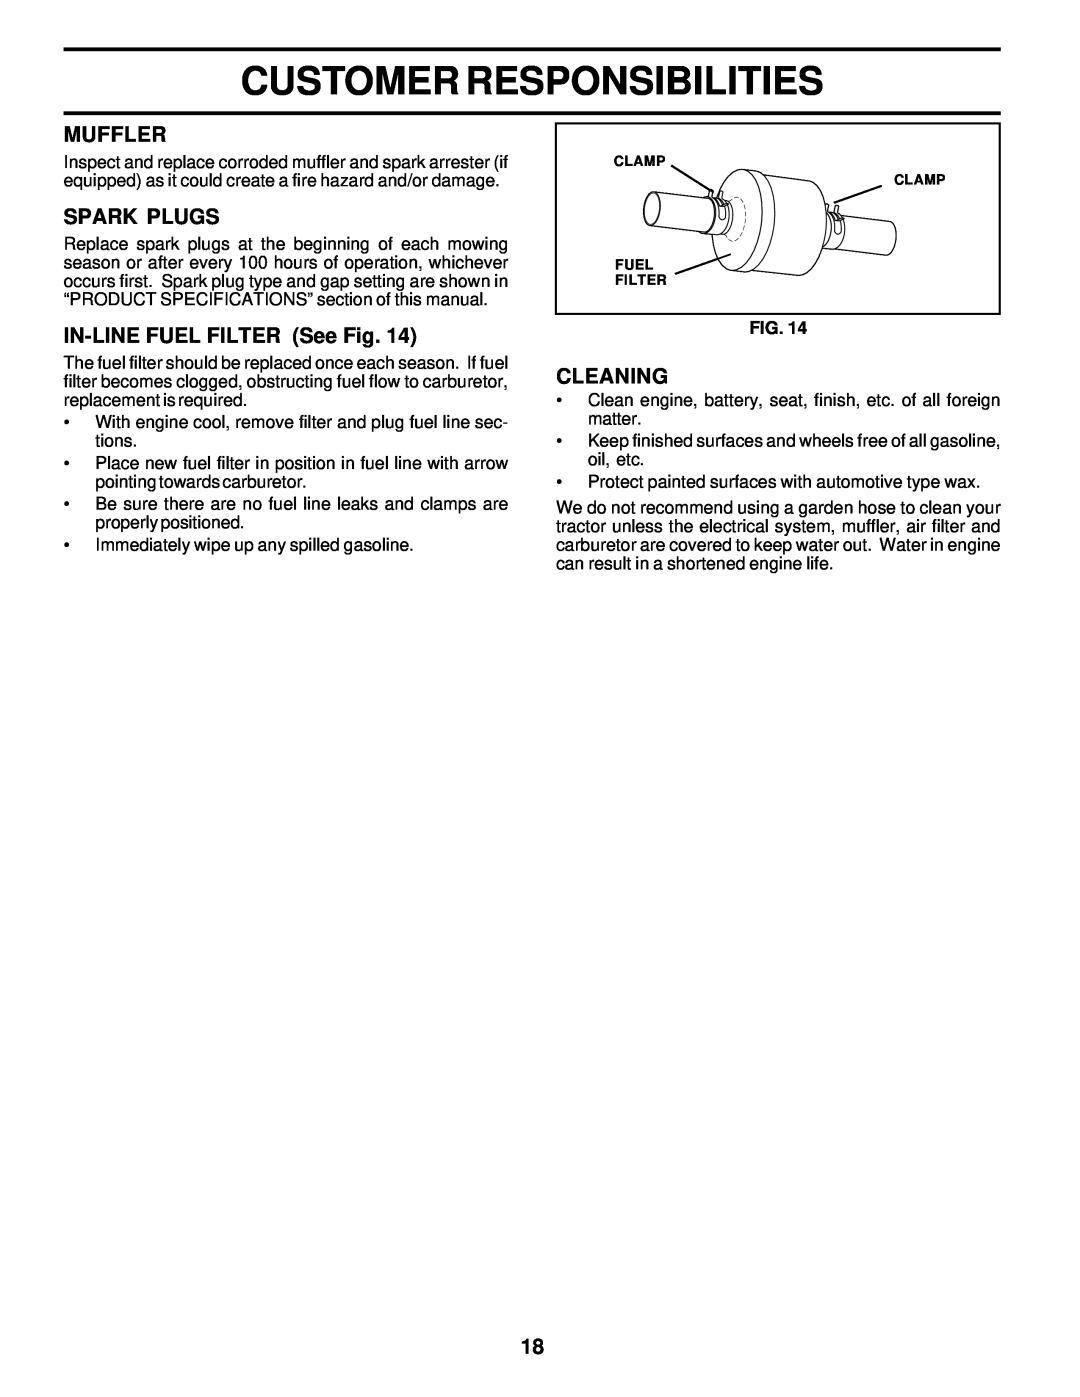 Weed Eater WE16542D owner manual Muffler, Spark Plugs, IN-LINE FUEL FILTER See Fig, Cleaning, Customer Responsibilities 